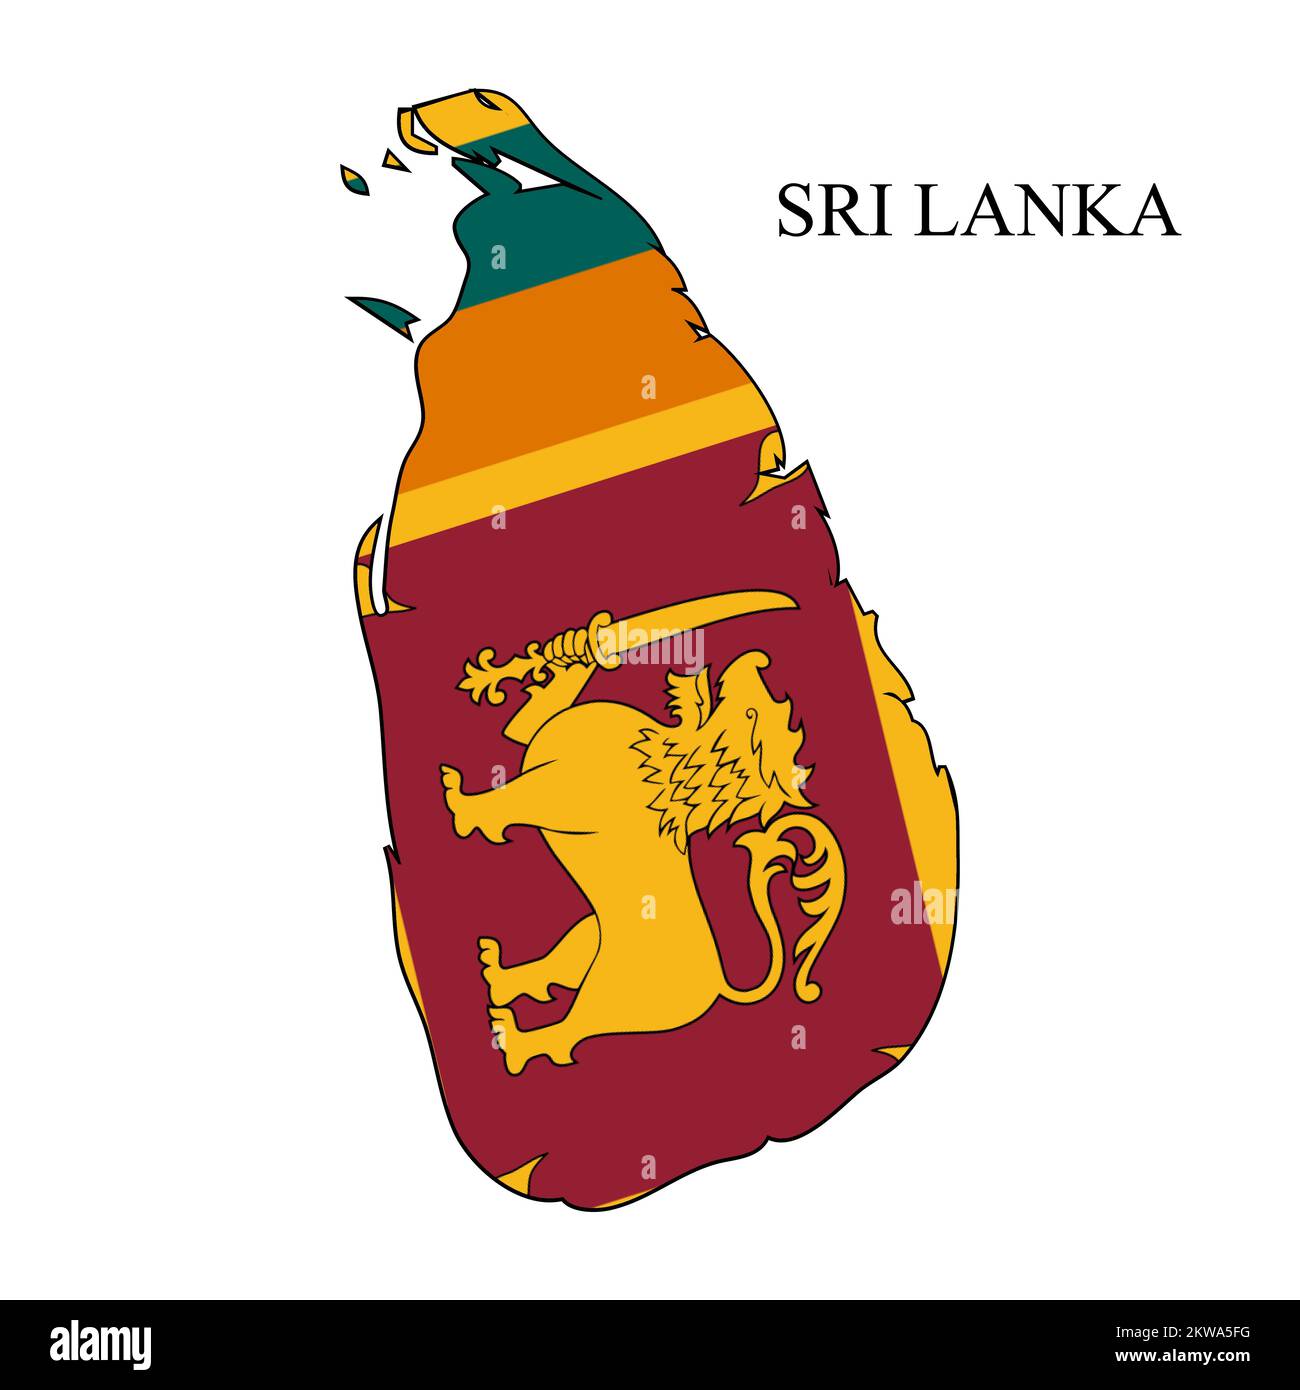 Sri Lanka map vector illustration. Global economy. Famous country. South Asia Stock Vector